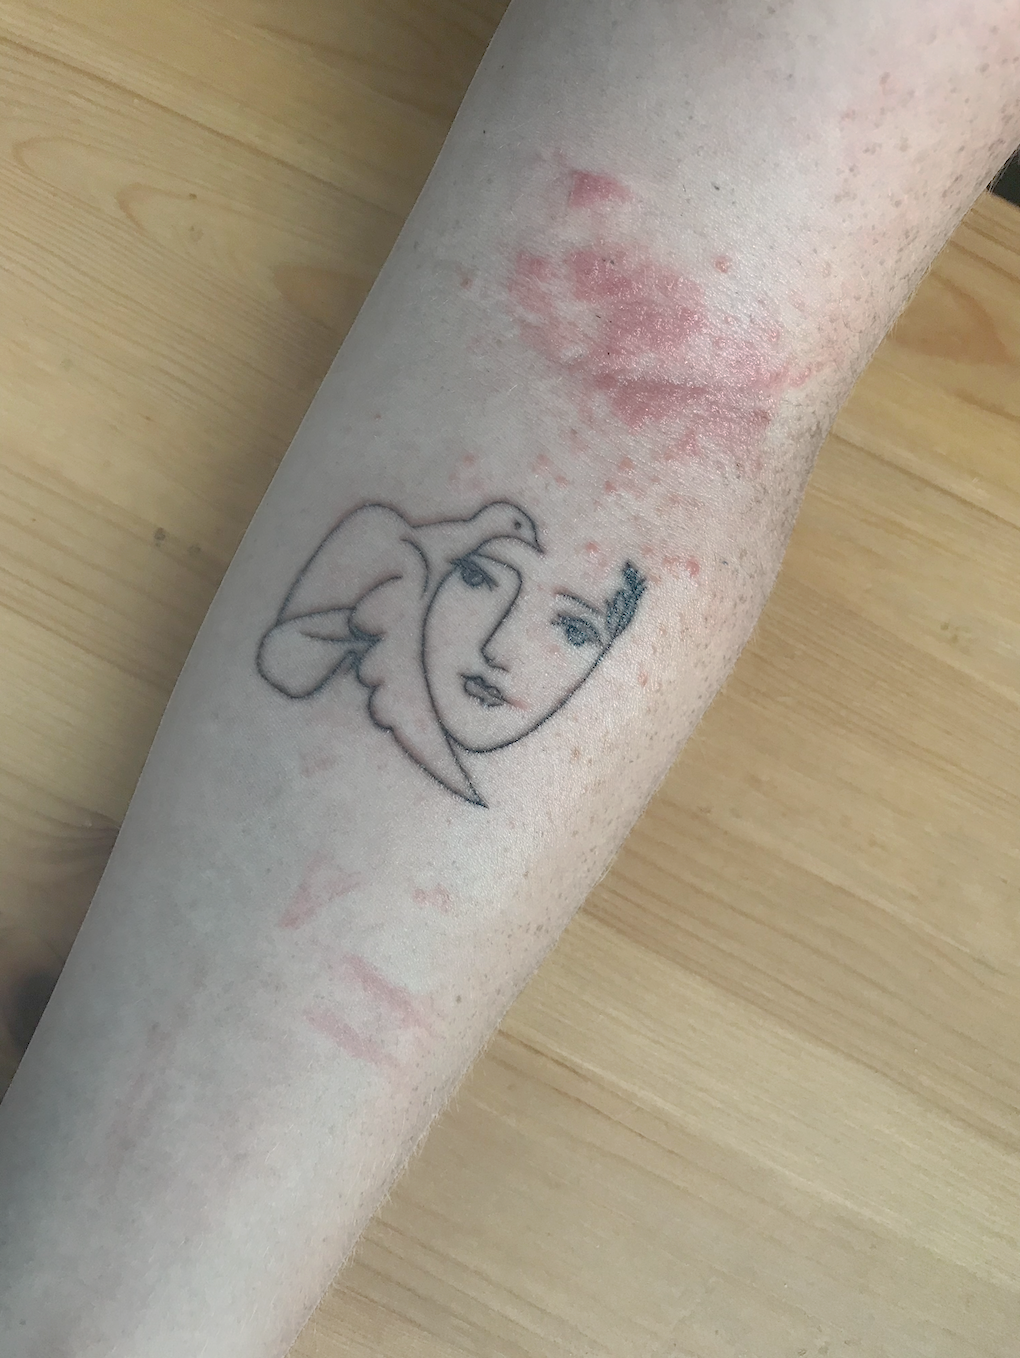 Tattoo Rash Signs You Might Have An Allergic Reaction